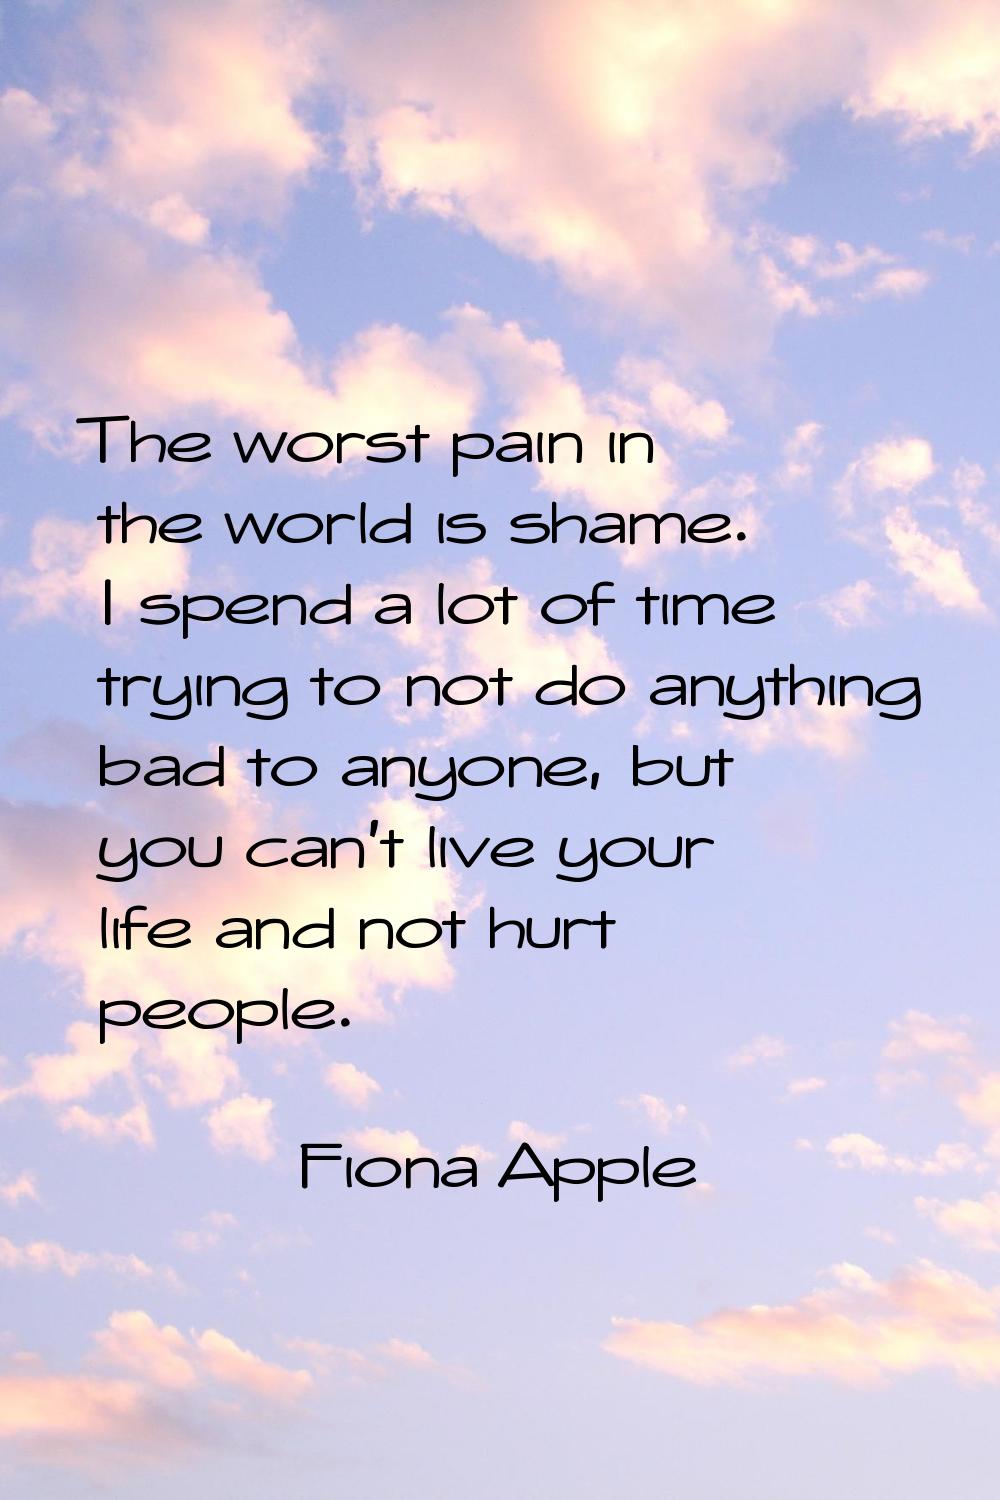 The worst pain in the world is shame. I spend a lot of time trying to not do anything bad to anyone